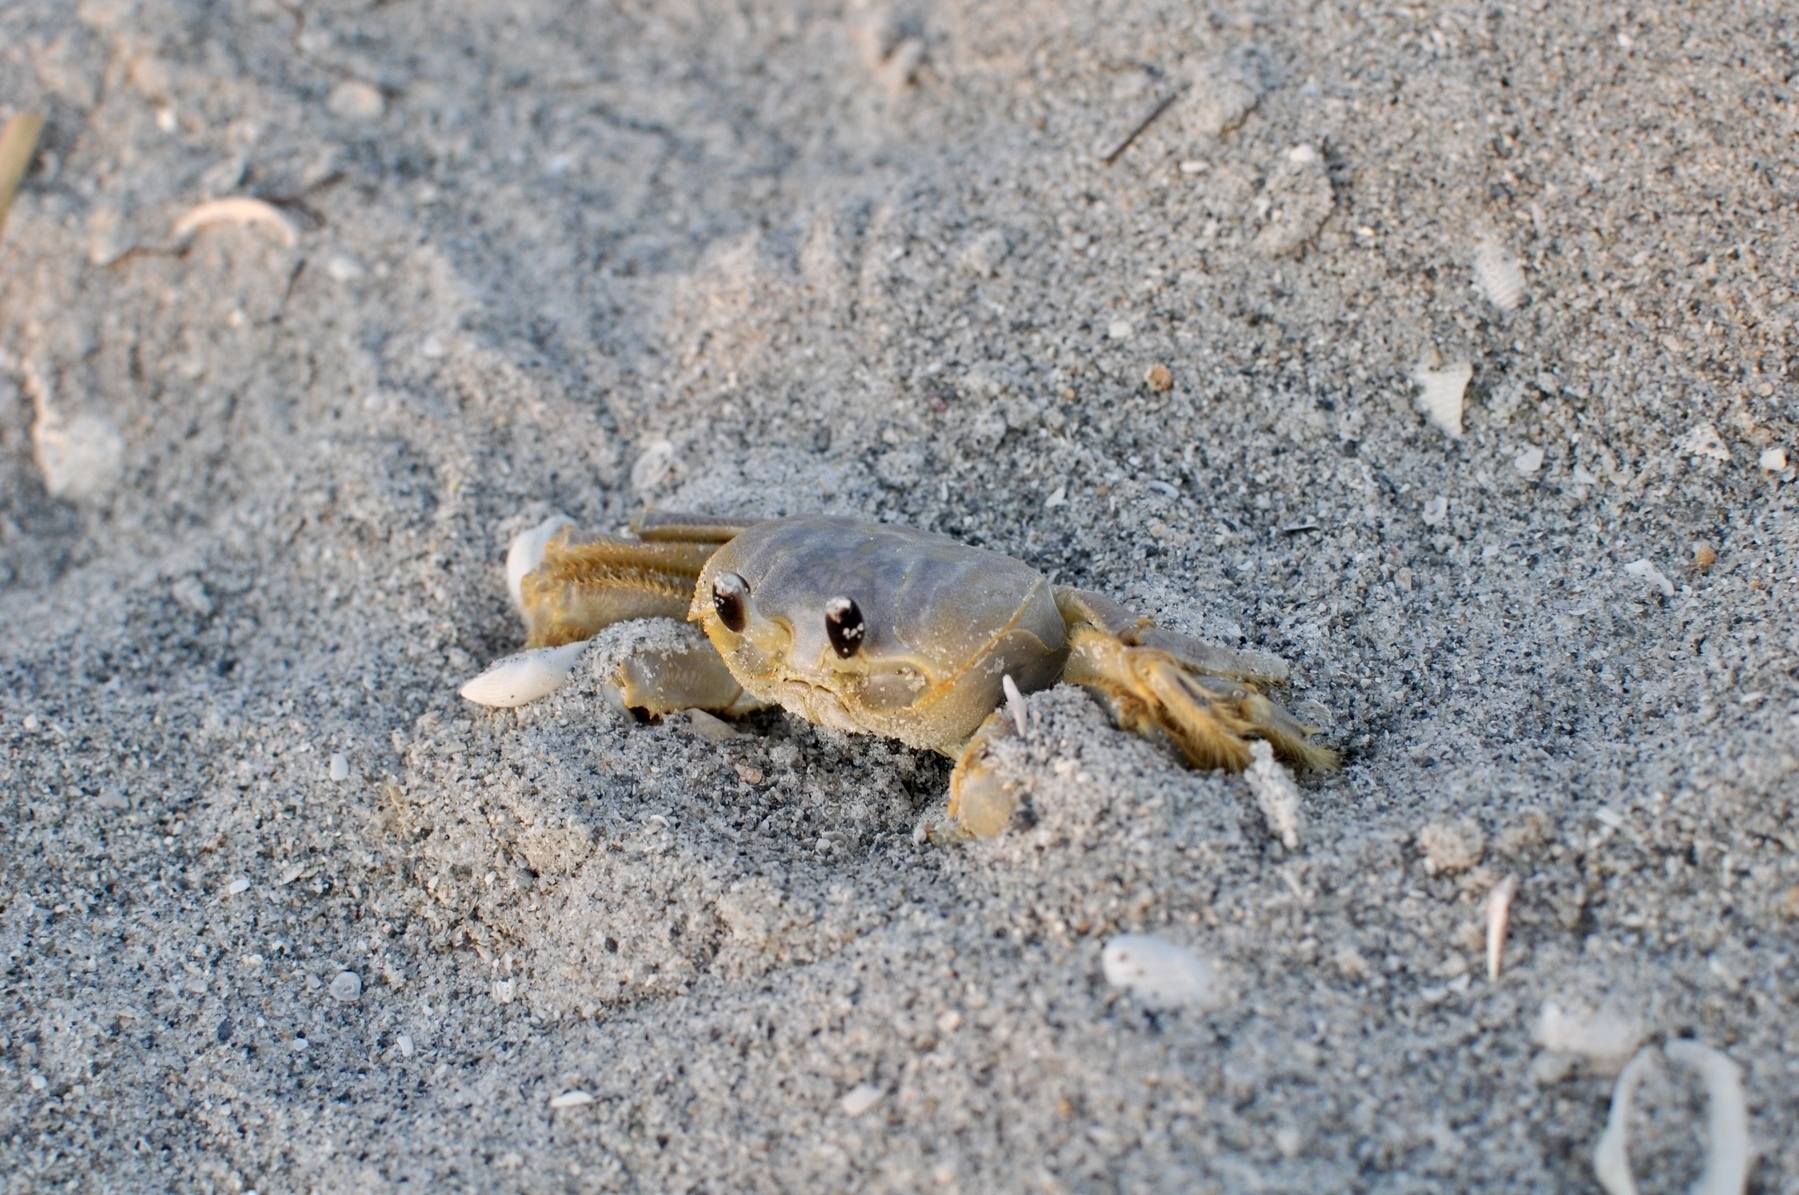 Close-up photo of a beige crab half-buried in sand.